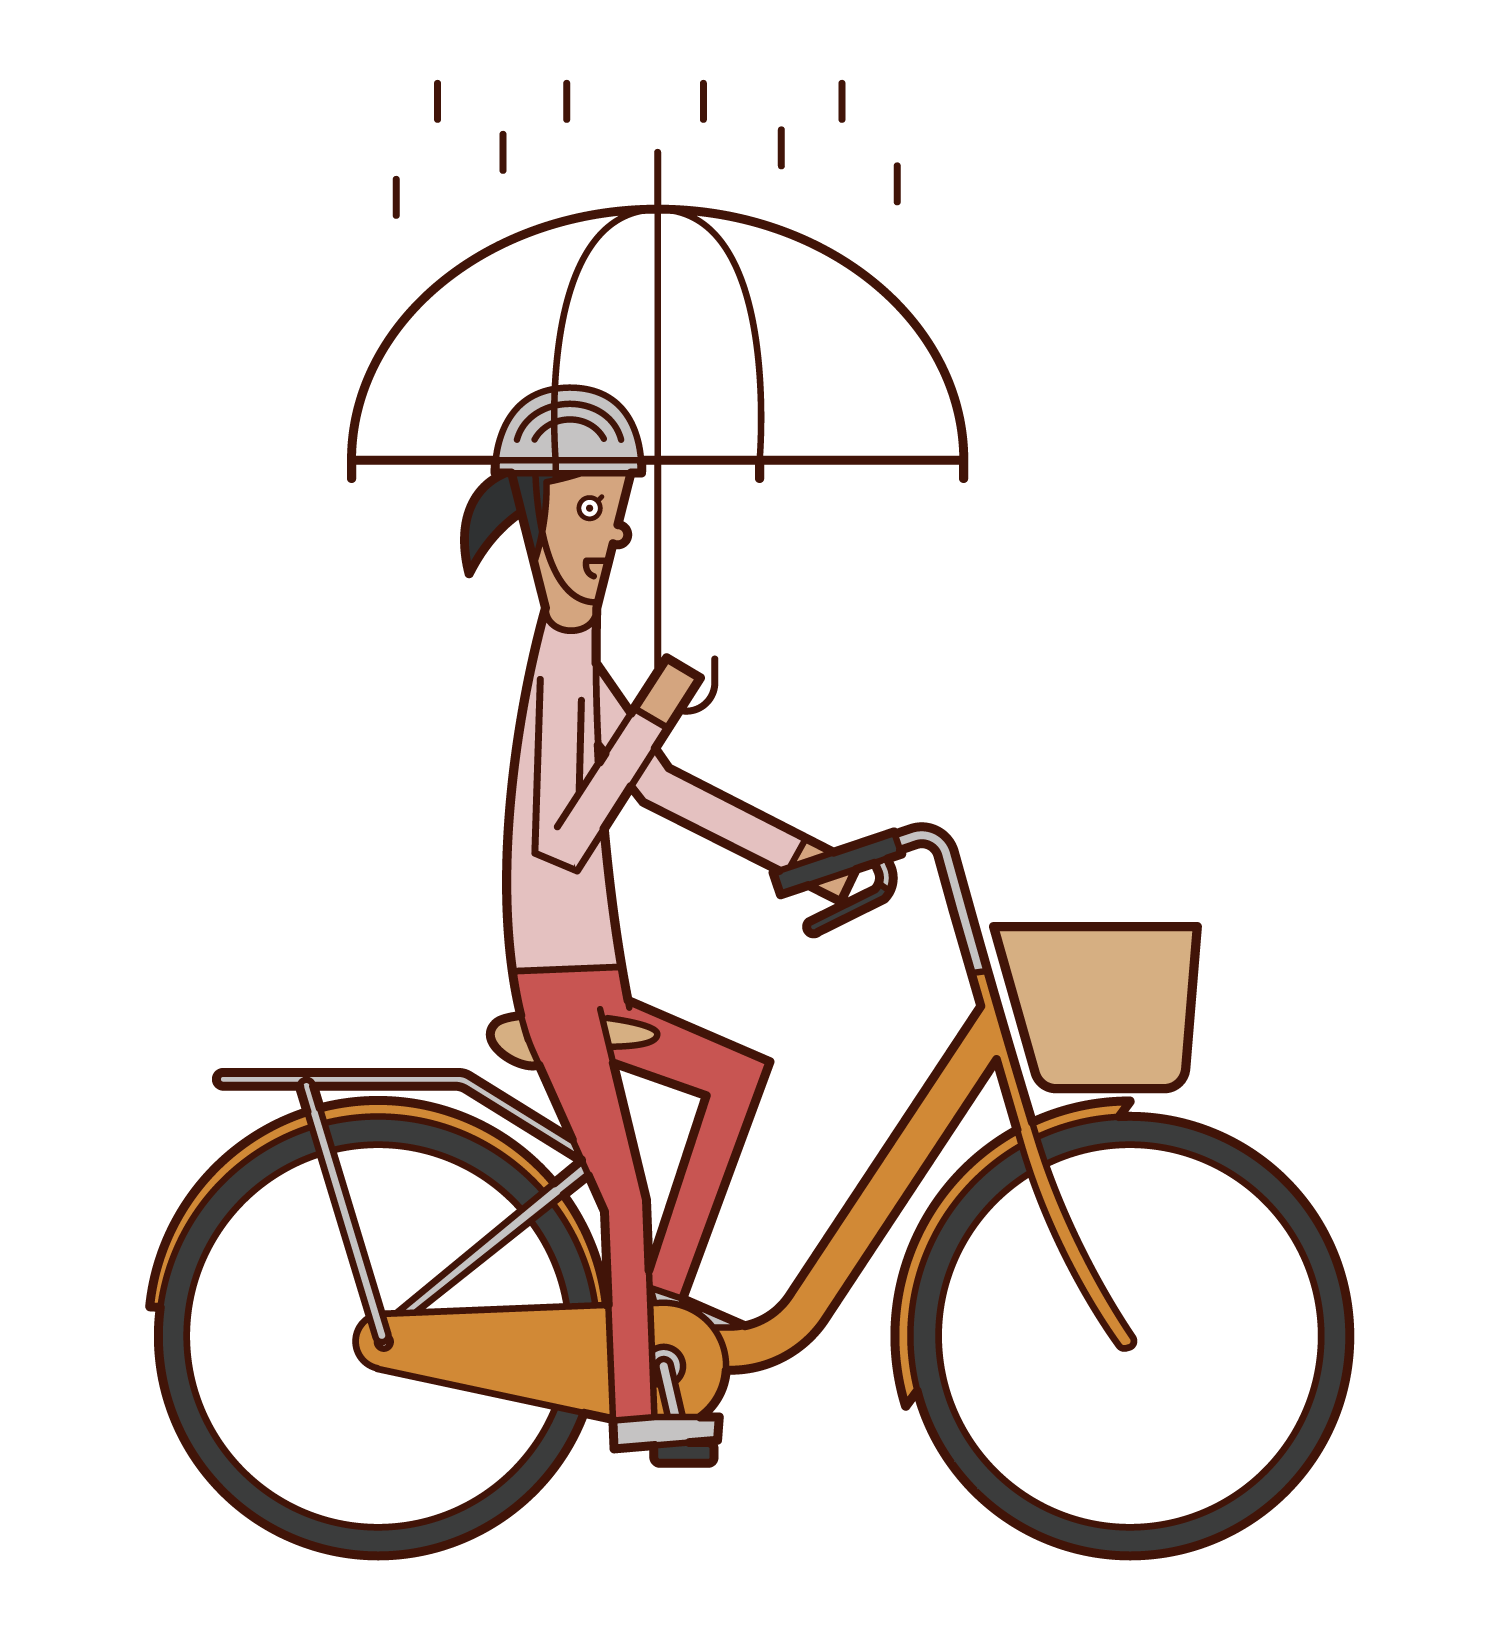 Illustration of a woman riding a bicycle with an umbrella